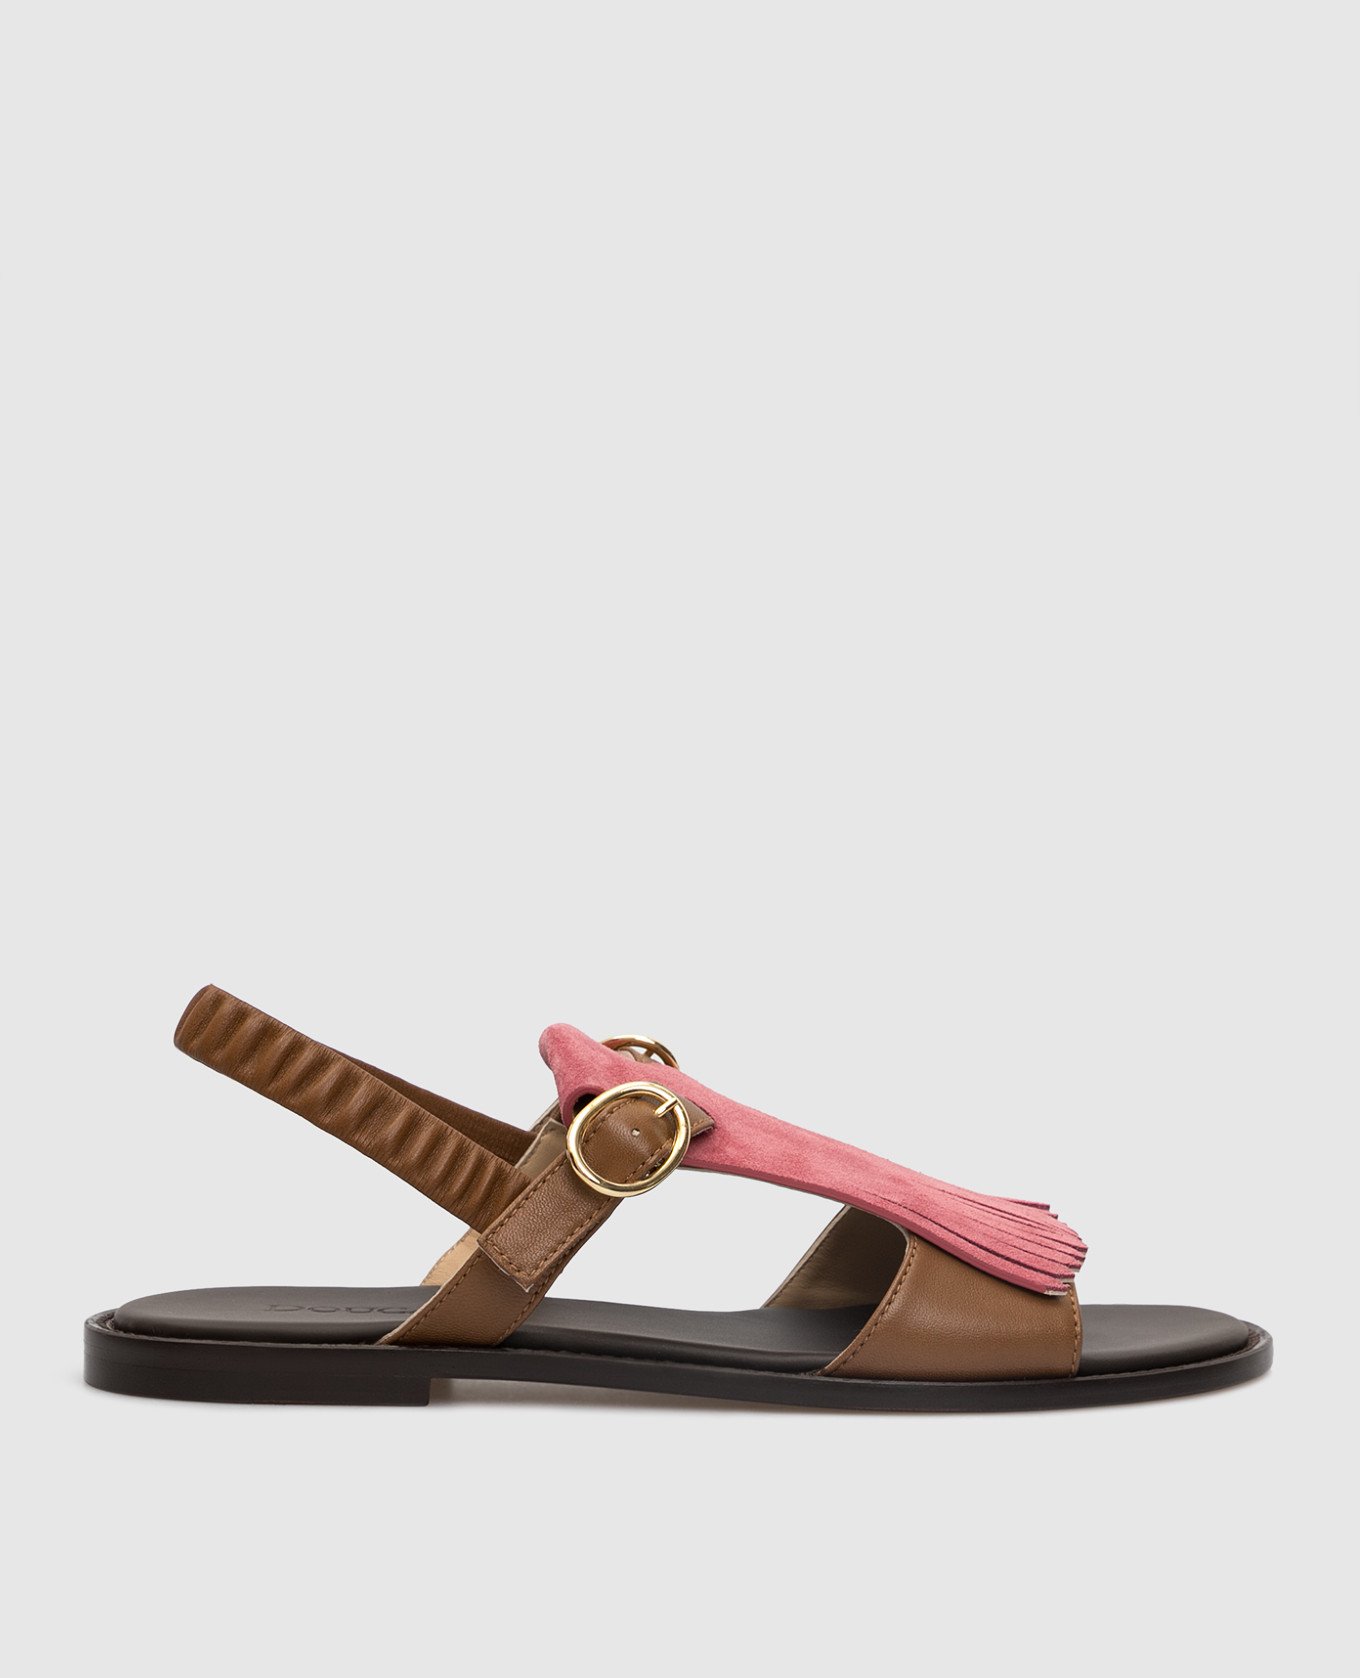 Brown leather sandals